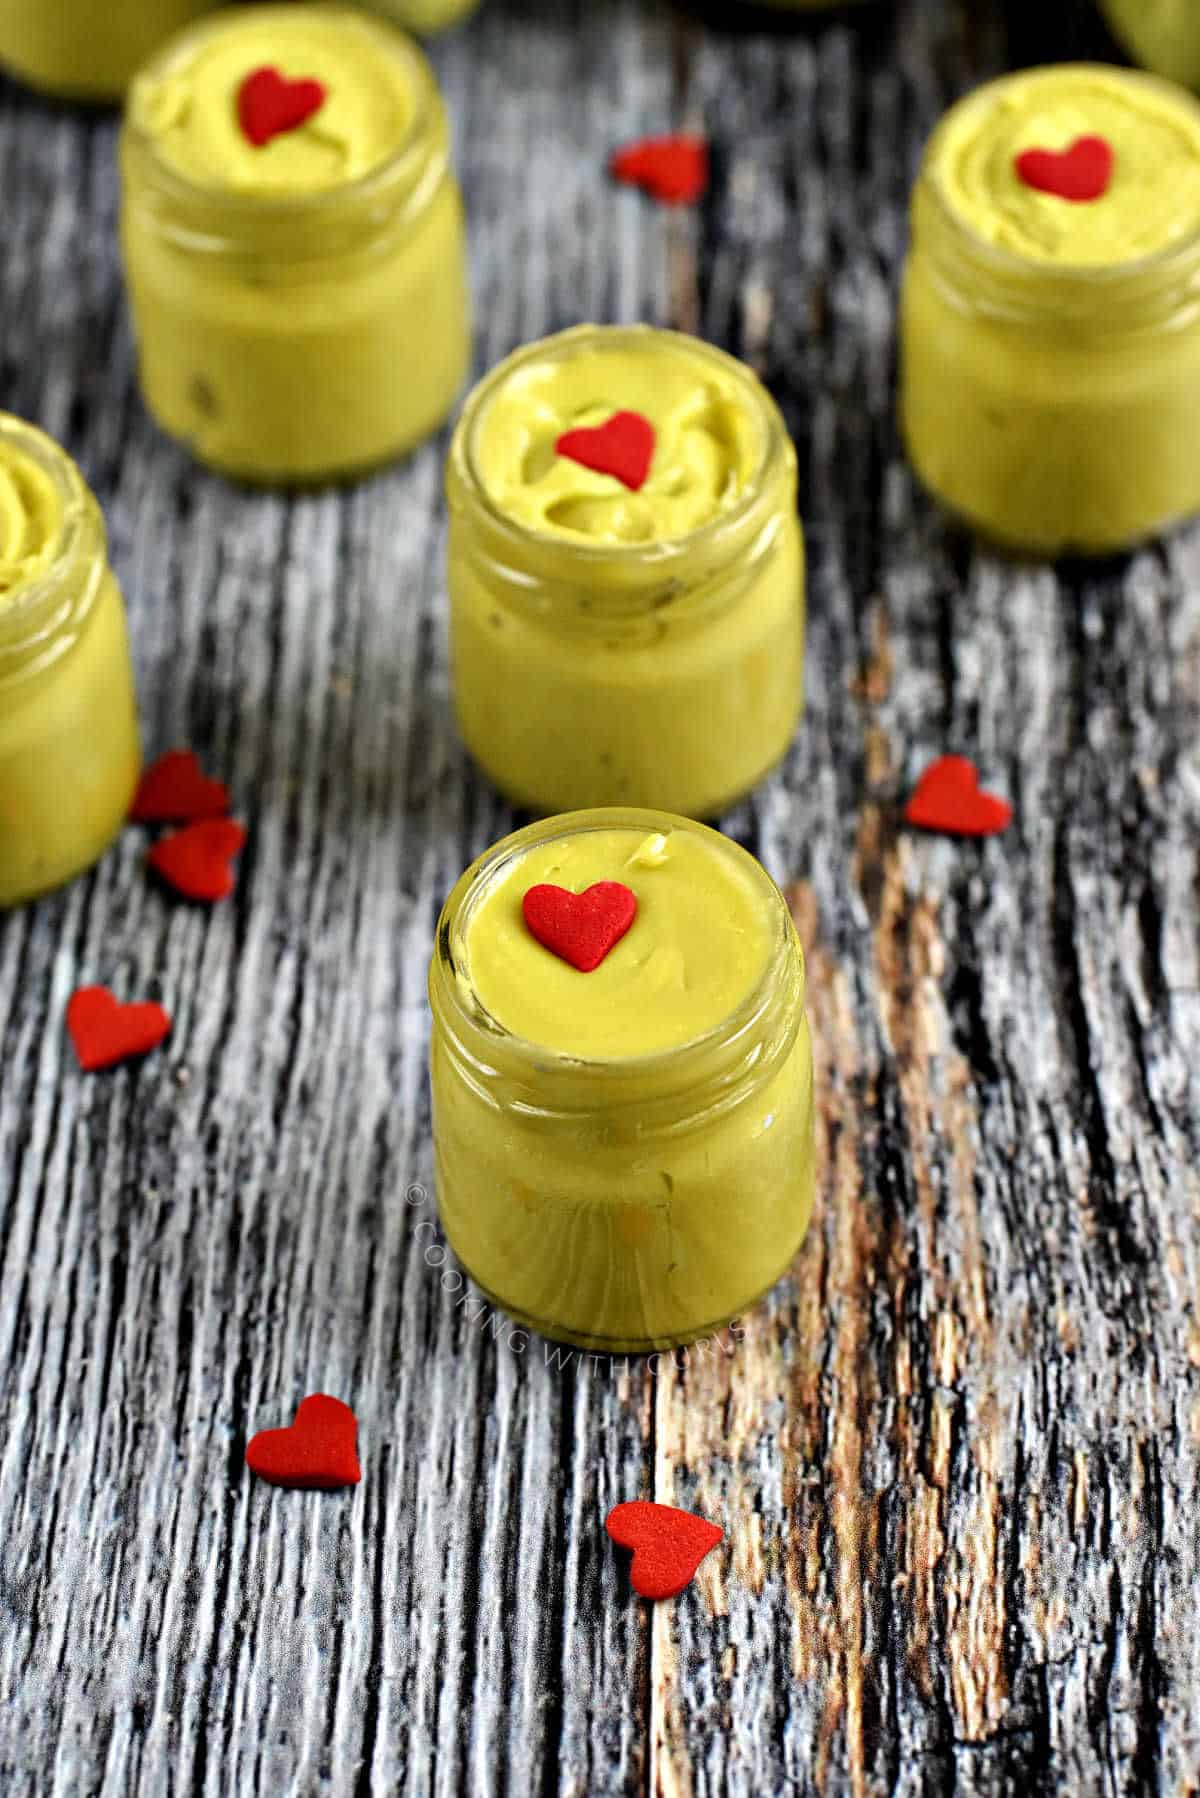 Five tiny jars of green Christmas fudge topped with a red heart candy.